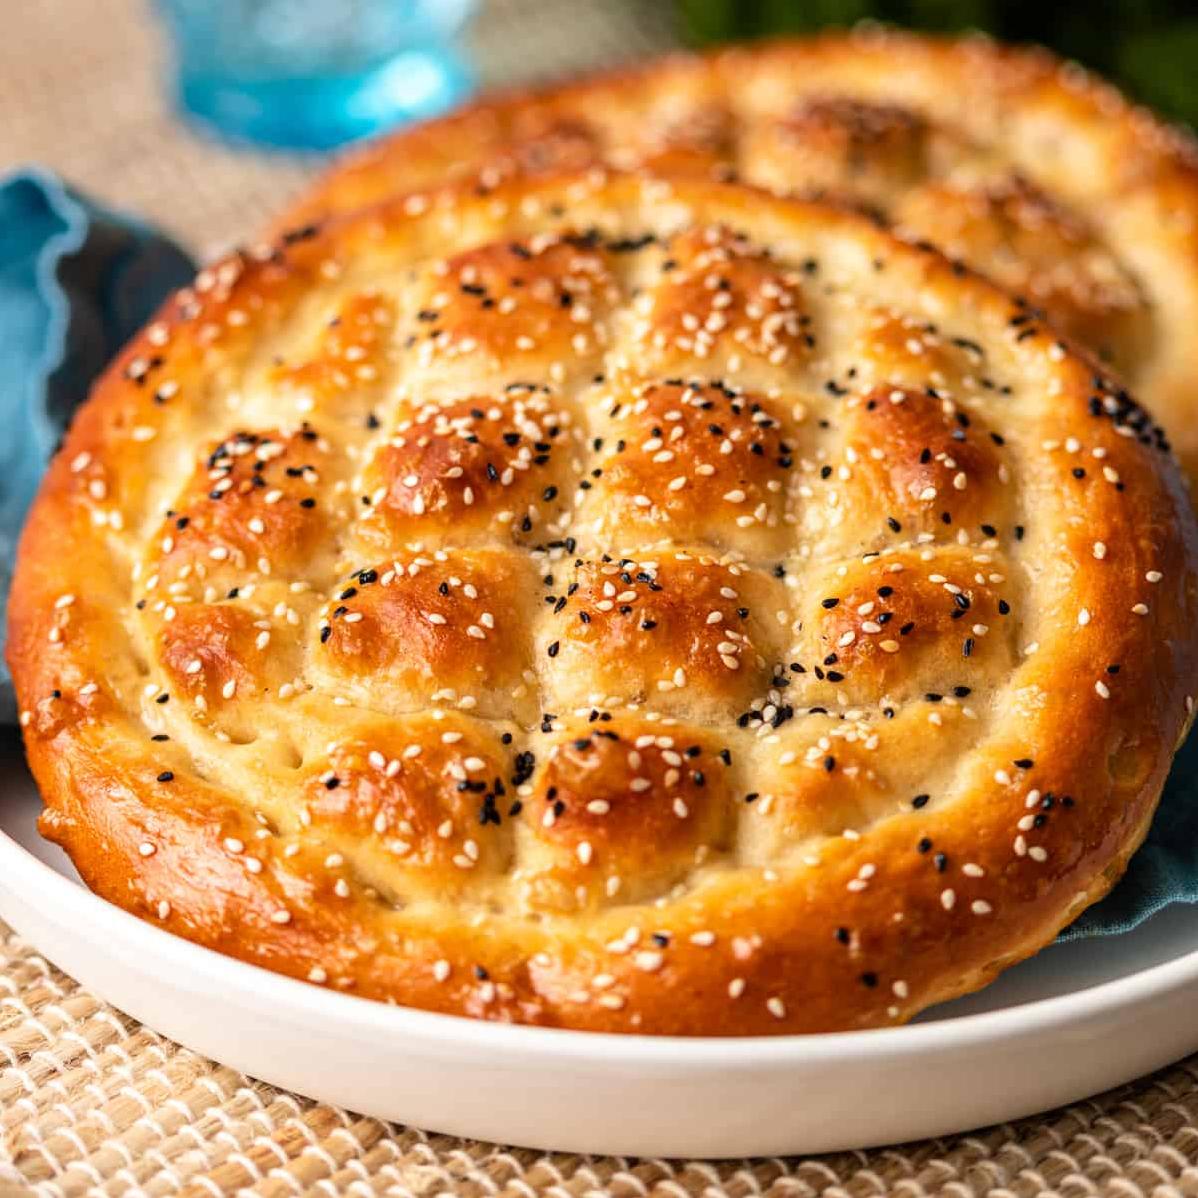  Rustic charm at its finest with this hearty loaf of Turkish bread.